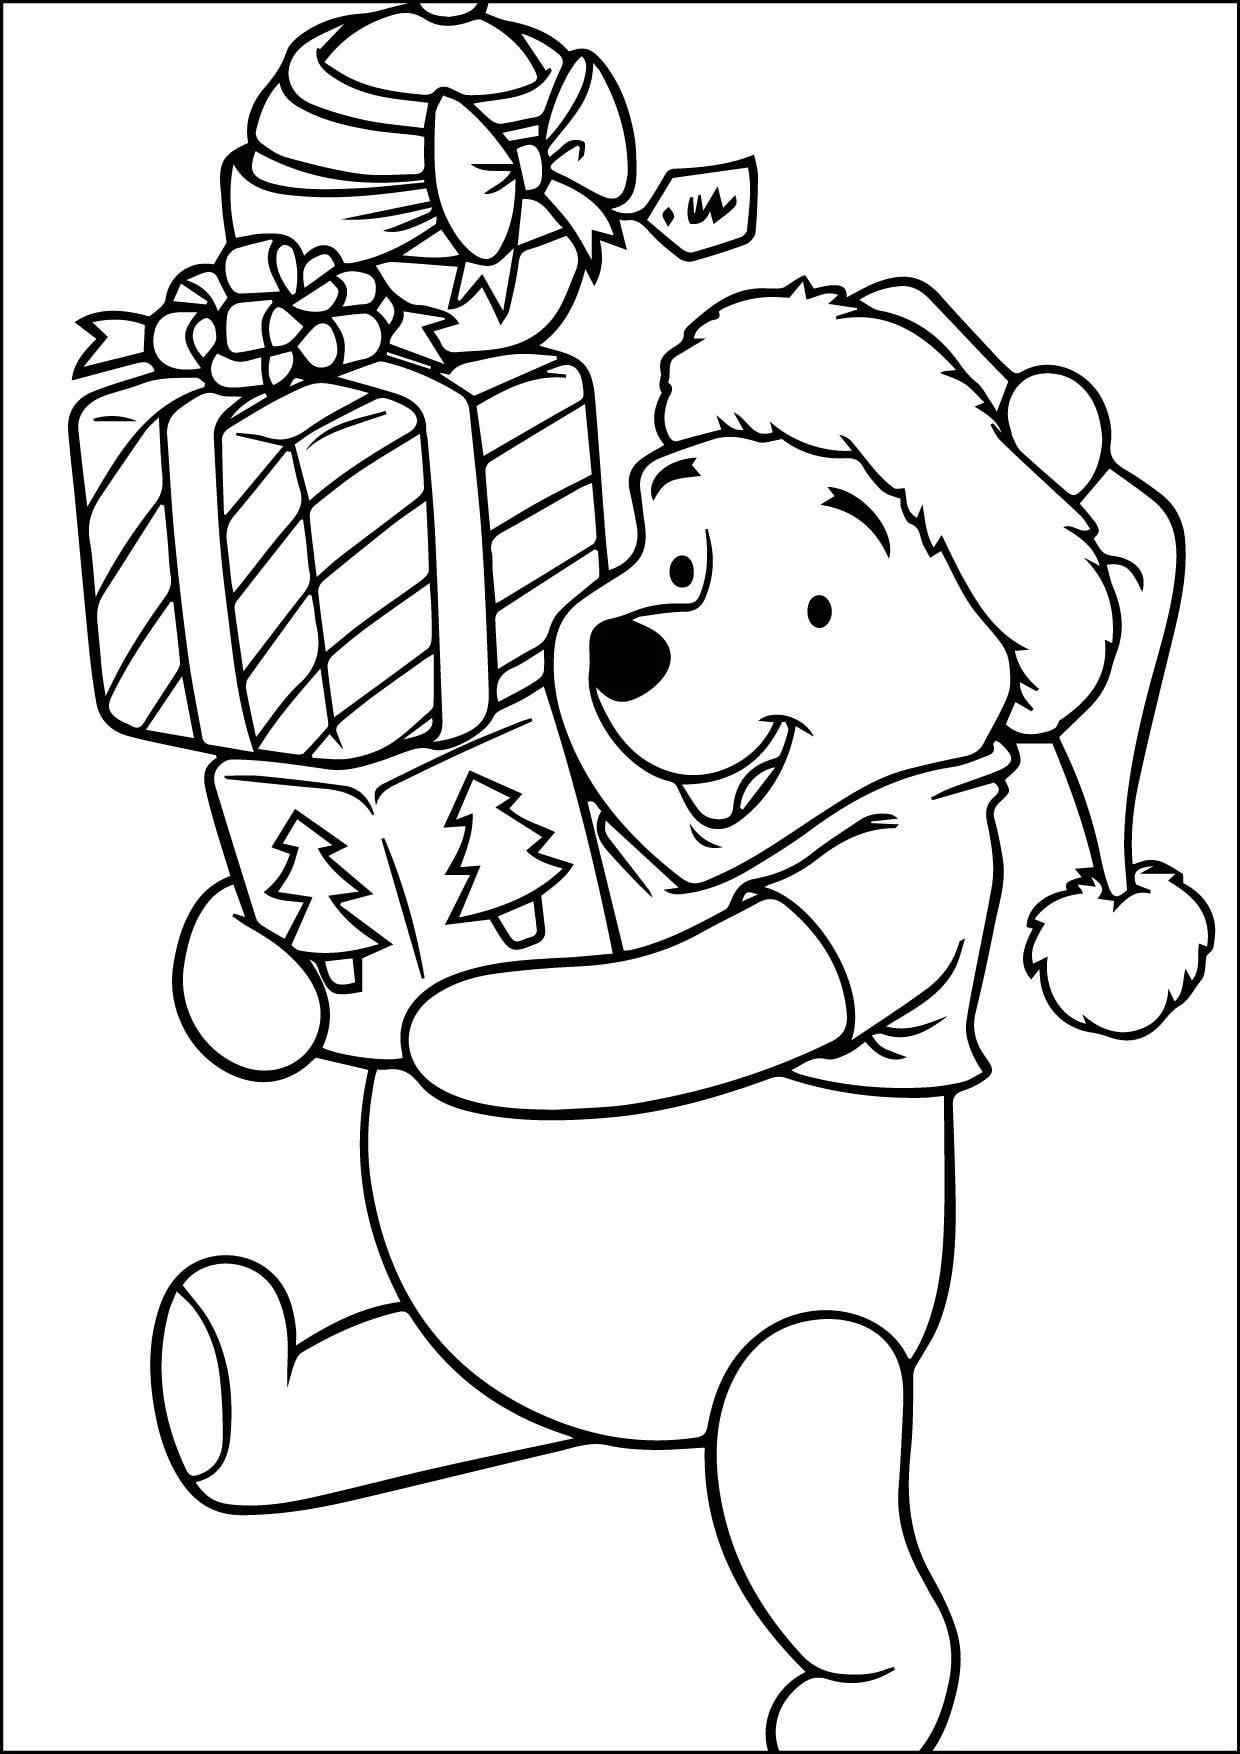 Winnie The Pooh Carries Christmas Gift For His Friends Coloring Page